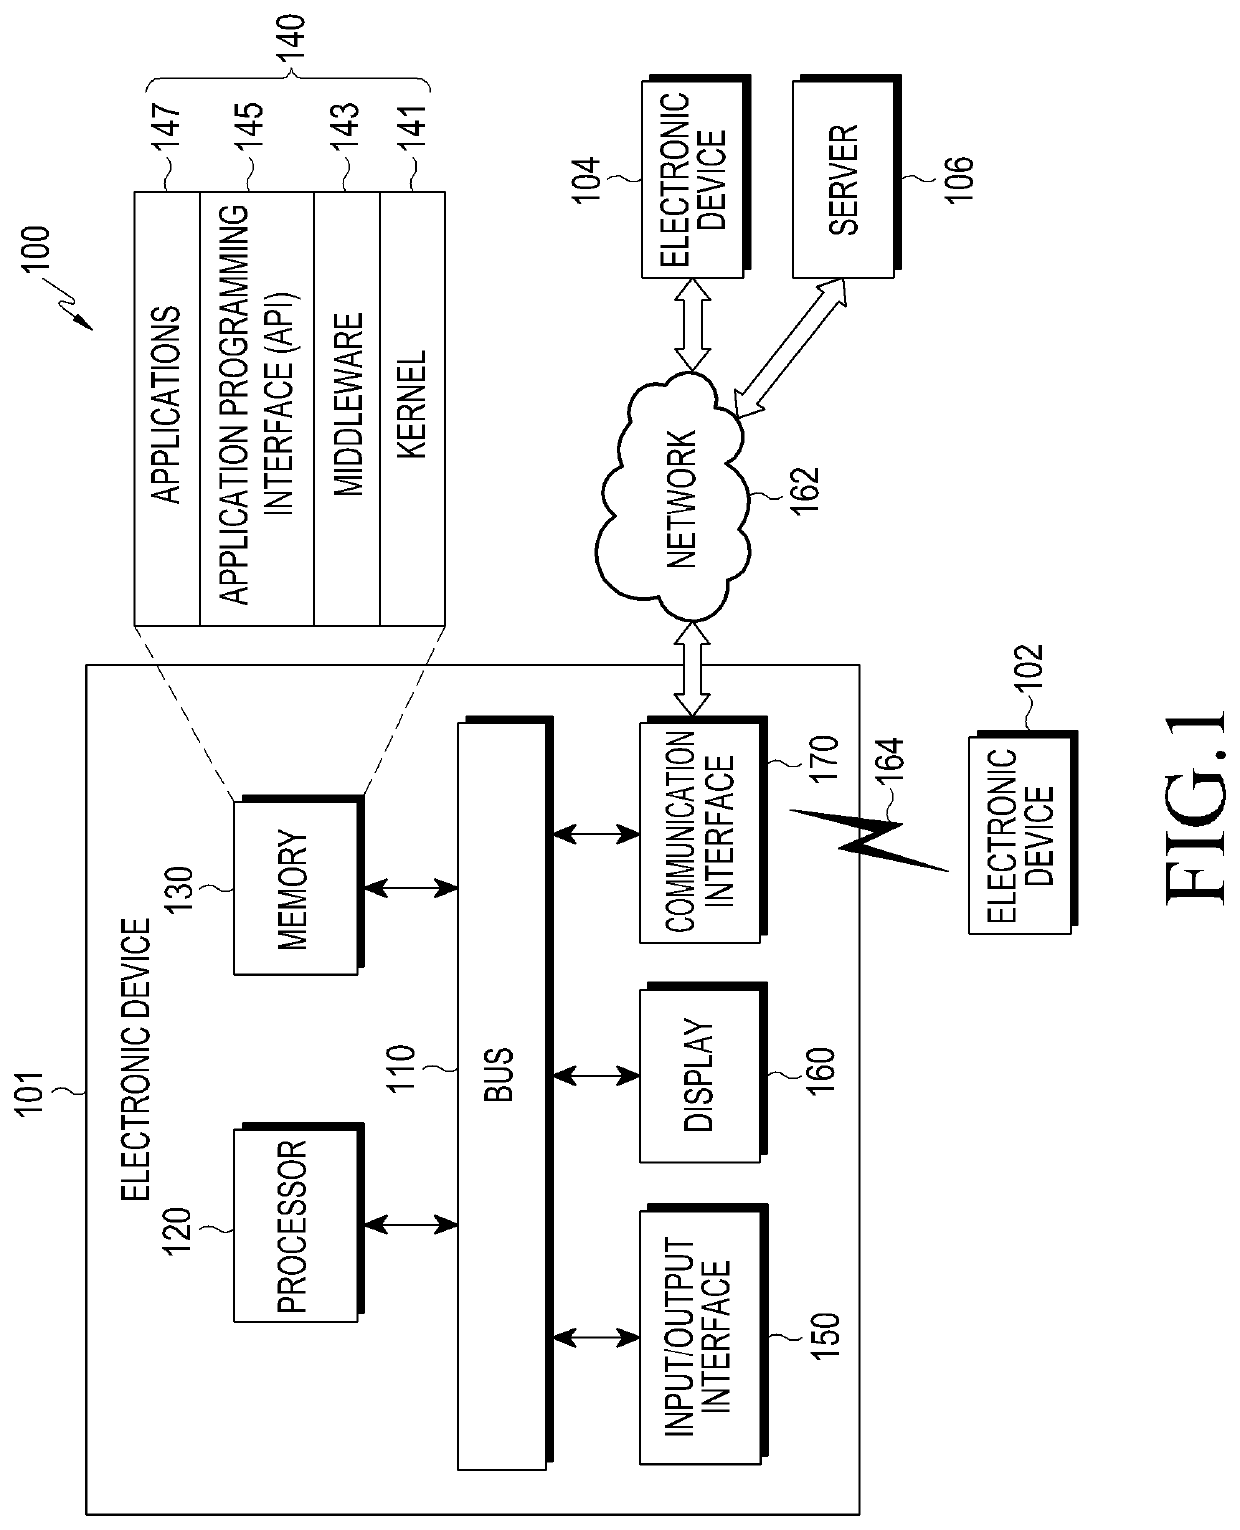 Electronic device and method for displaying content in response to scrolling inputs